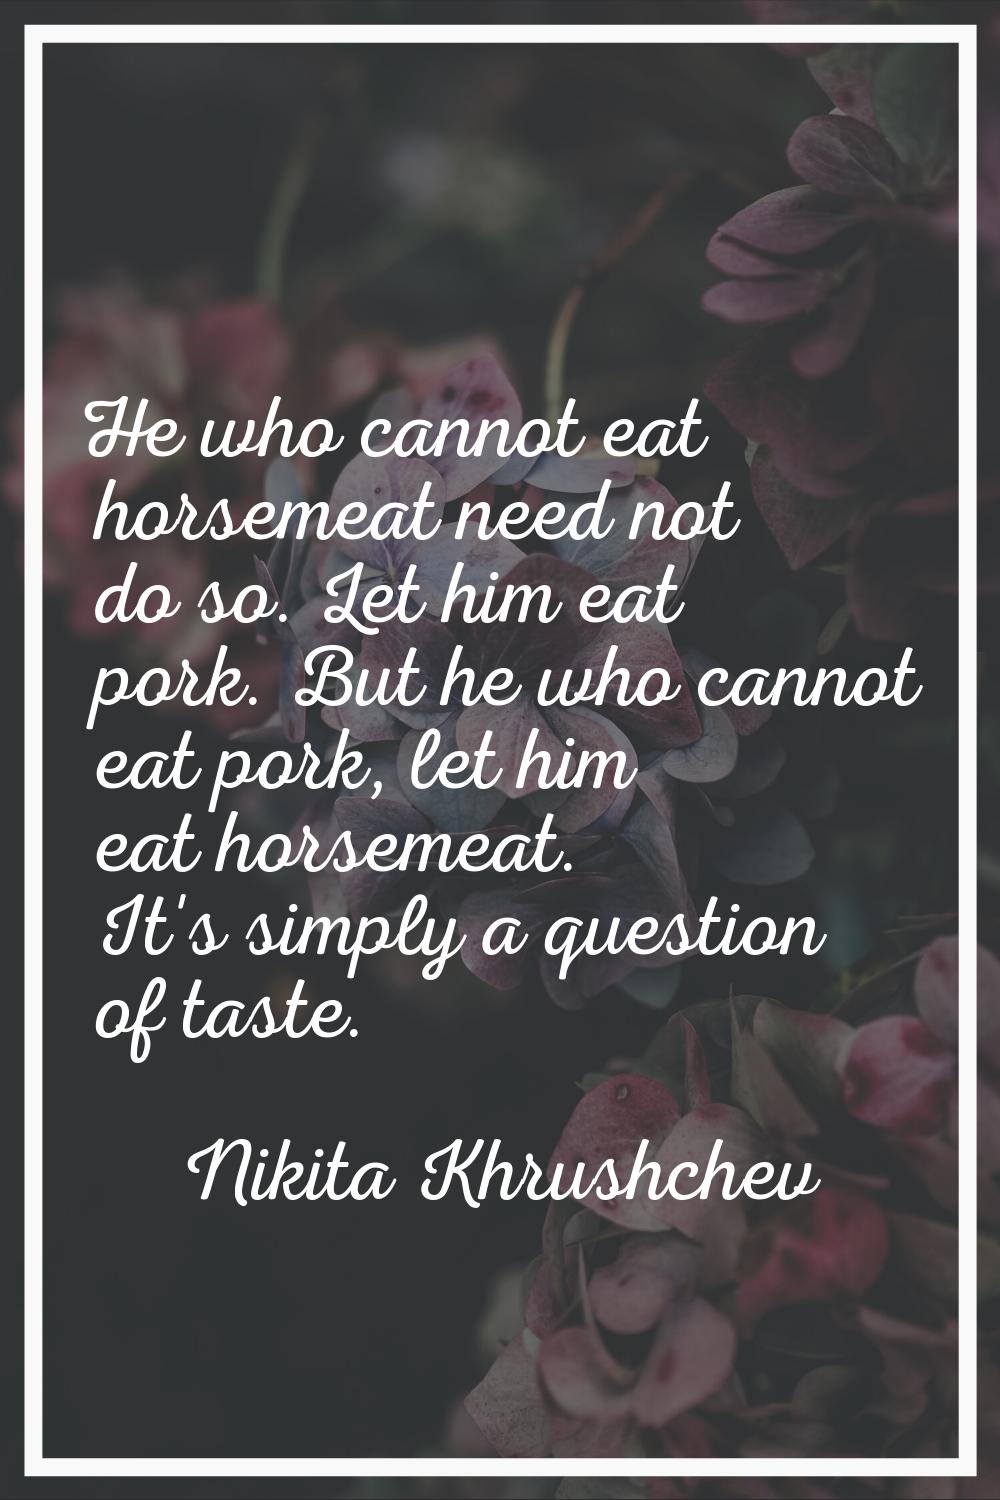 He who cannot eat horsemeat need not do so. Let him eat pork. But he who cannot eat pork, let him e